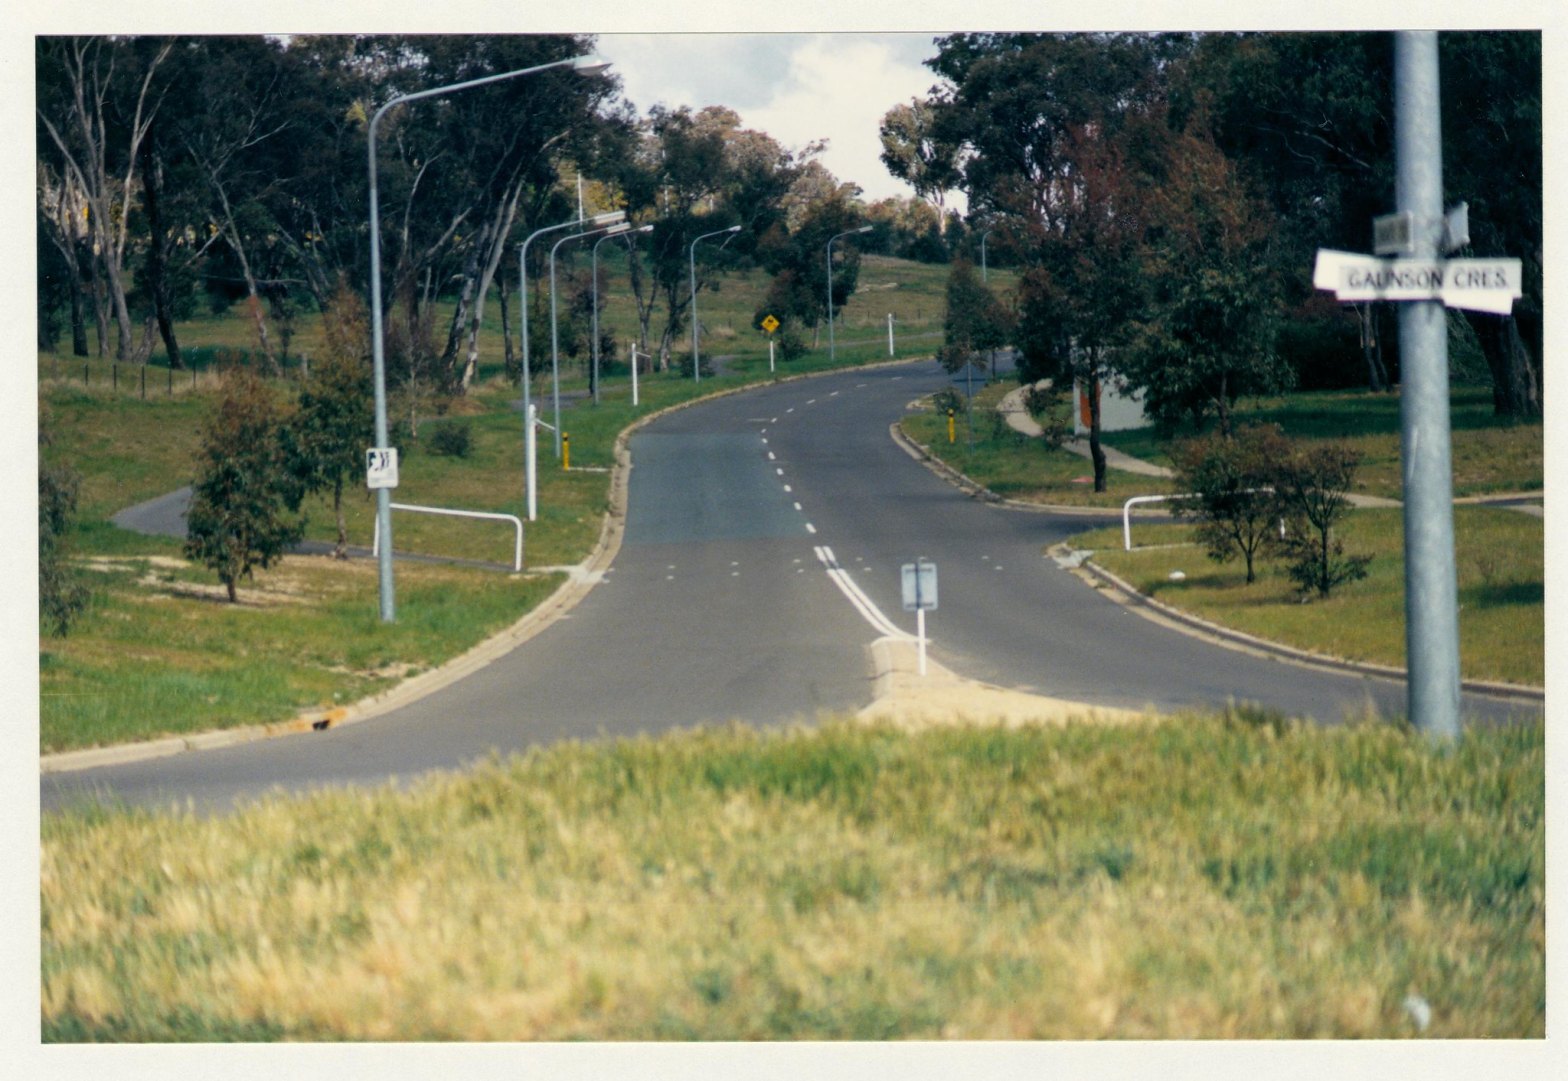 Pathway crossing Longmore Crescent at Gaunson Crescent. View from roadway centre. c1989